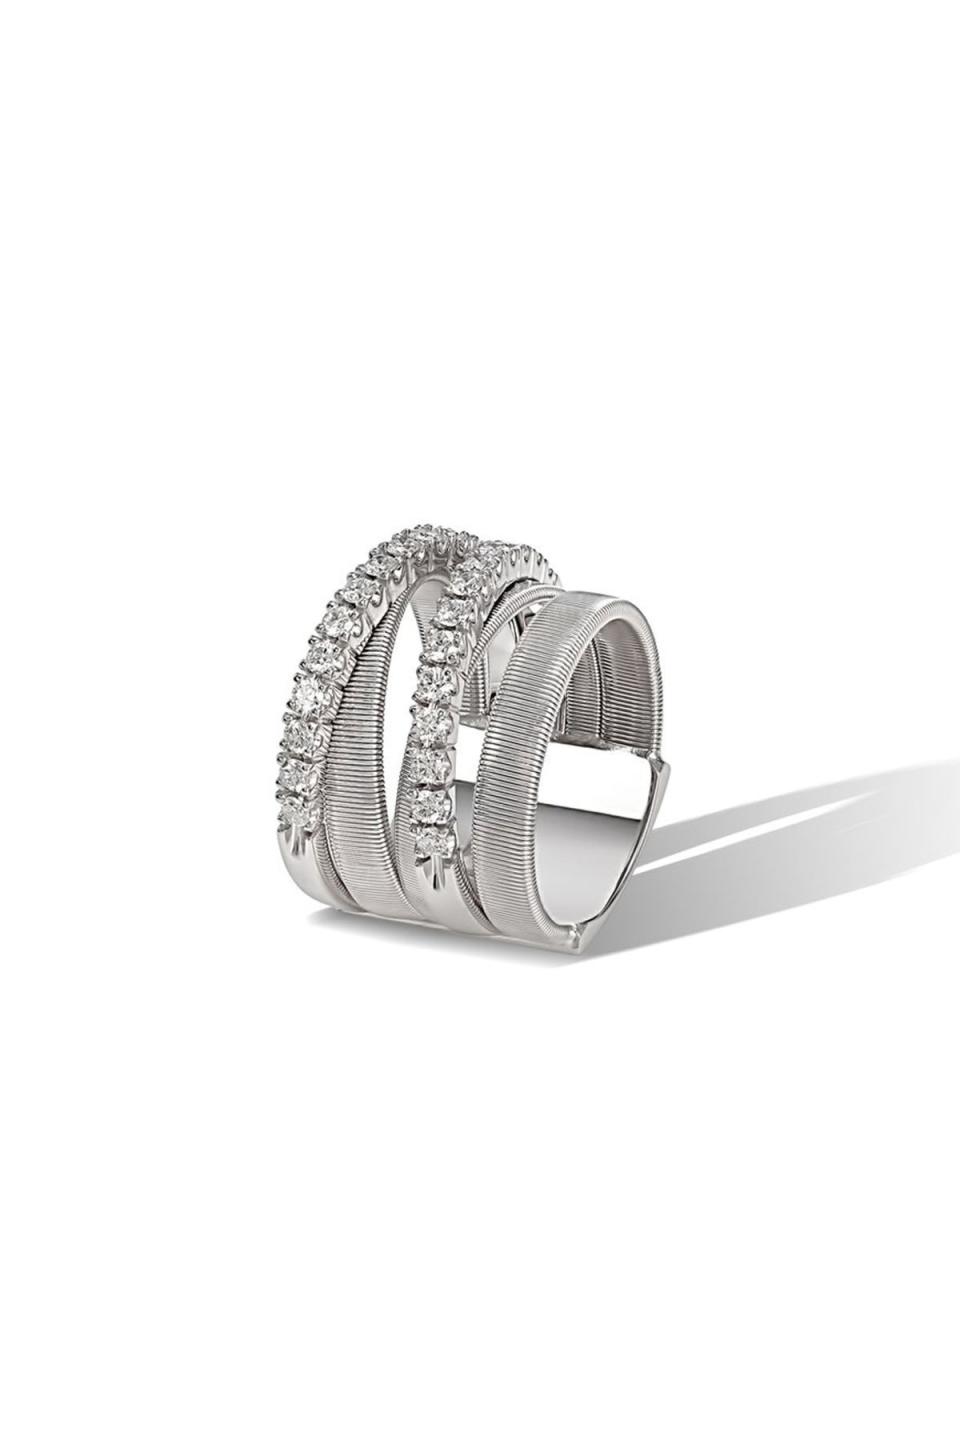 Masai Collection 18K White Gold and Diamond Ring